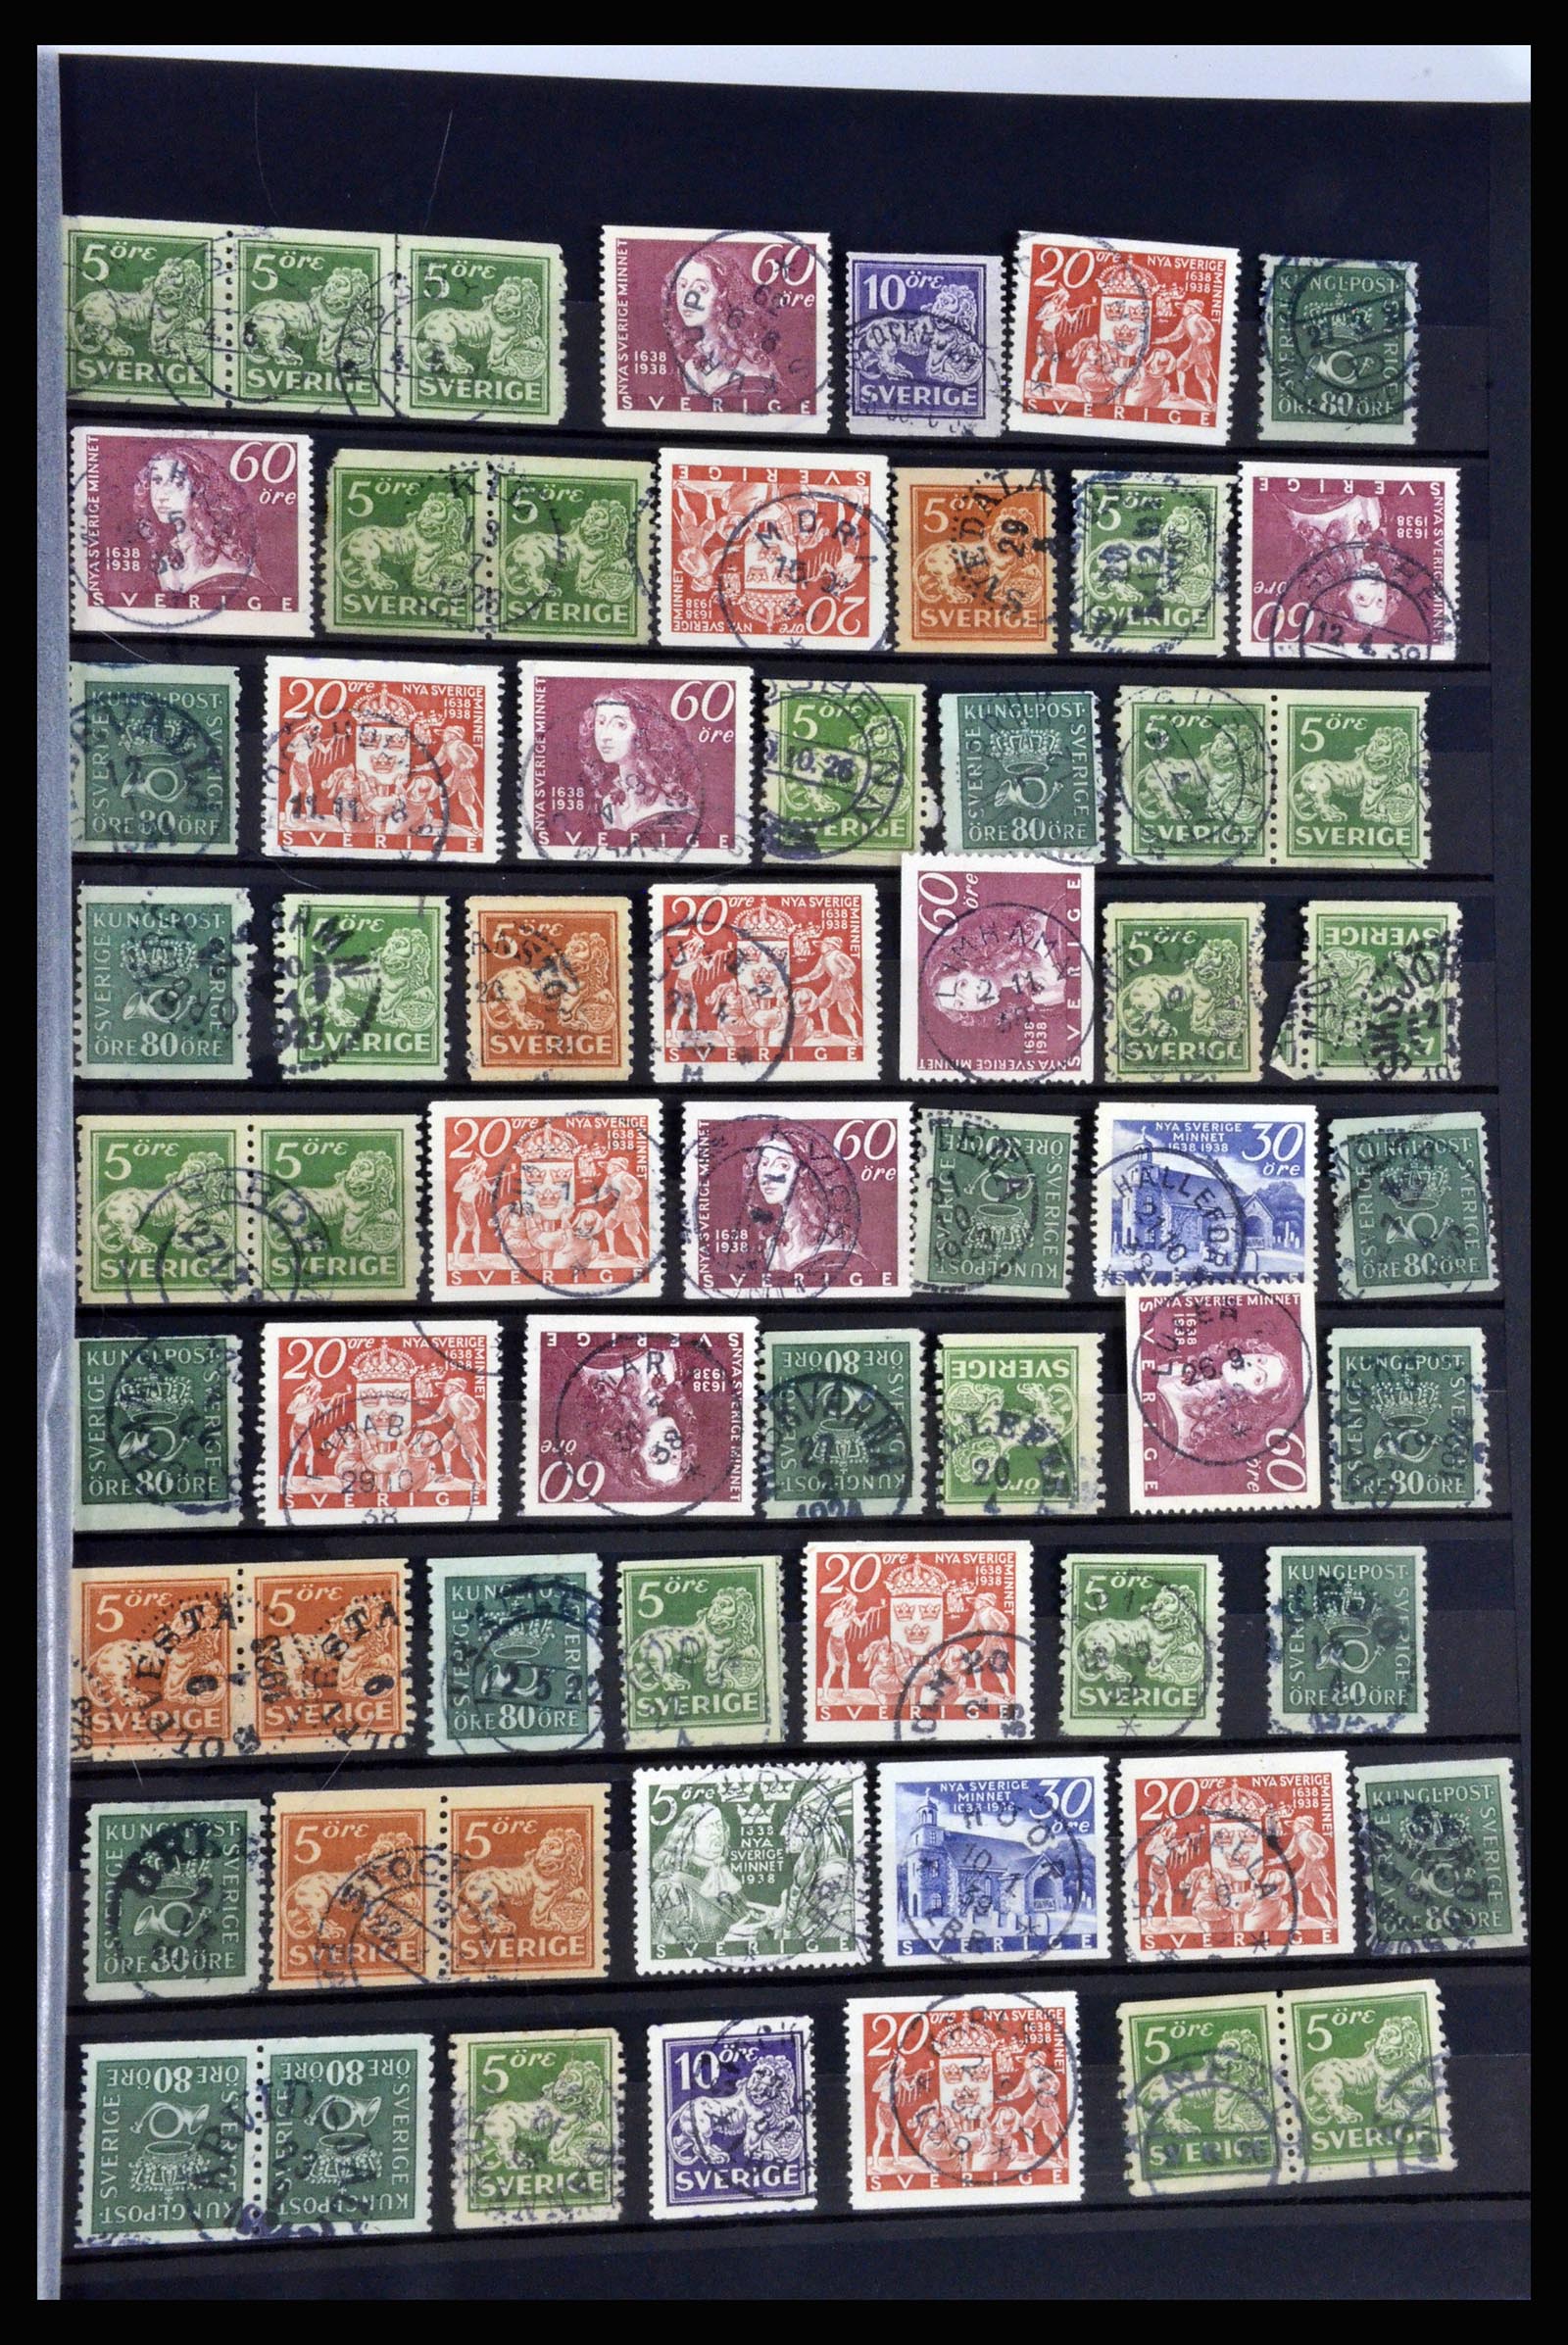 36316 043 - Stamp collection 36316 Sweden cancellations 1920-1938.